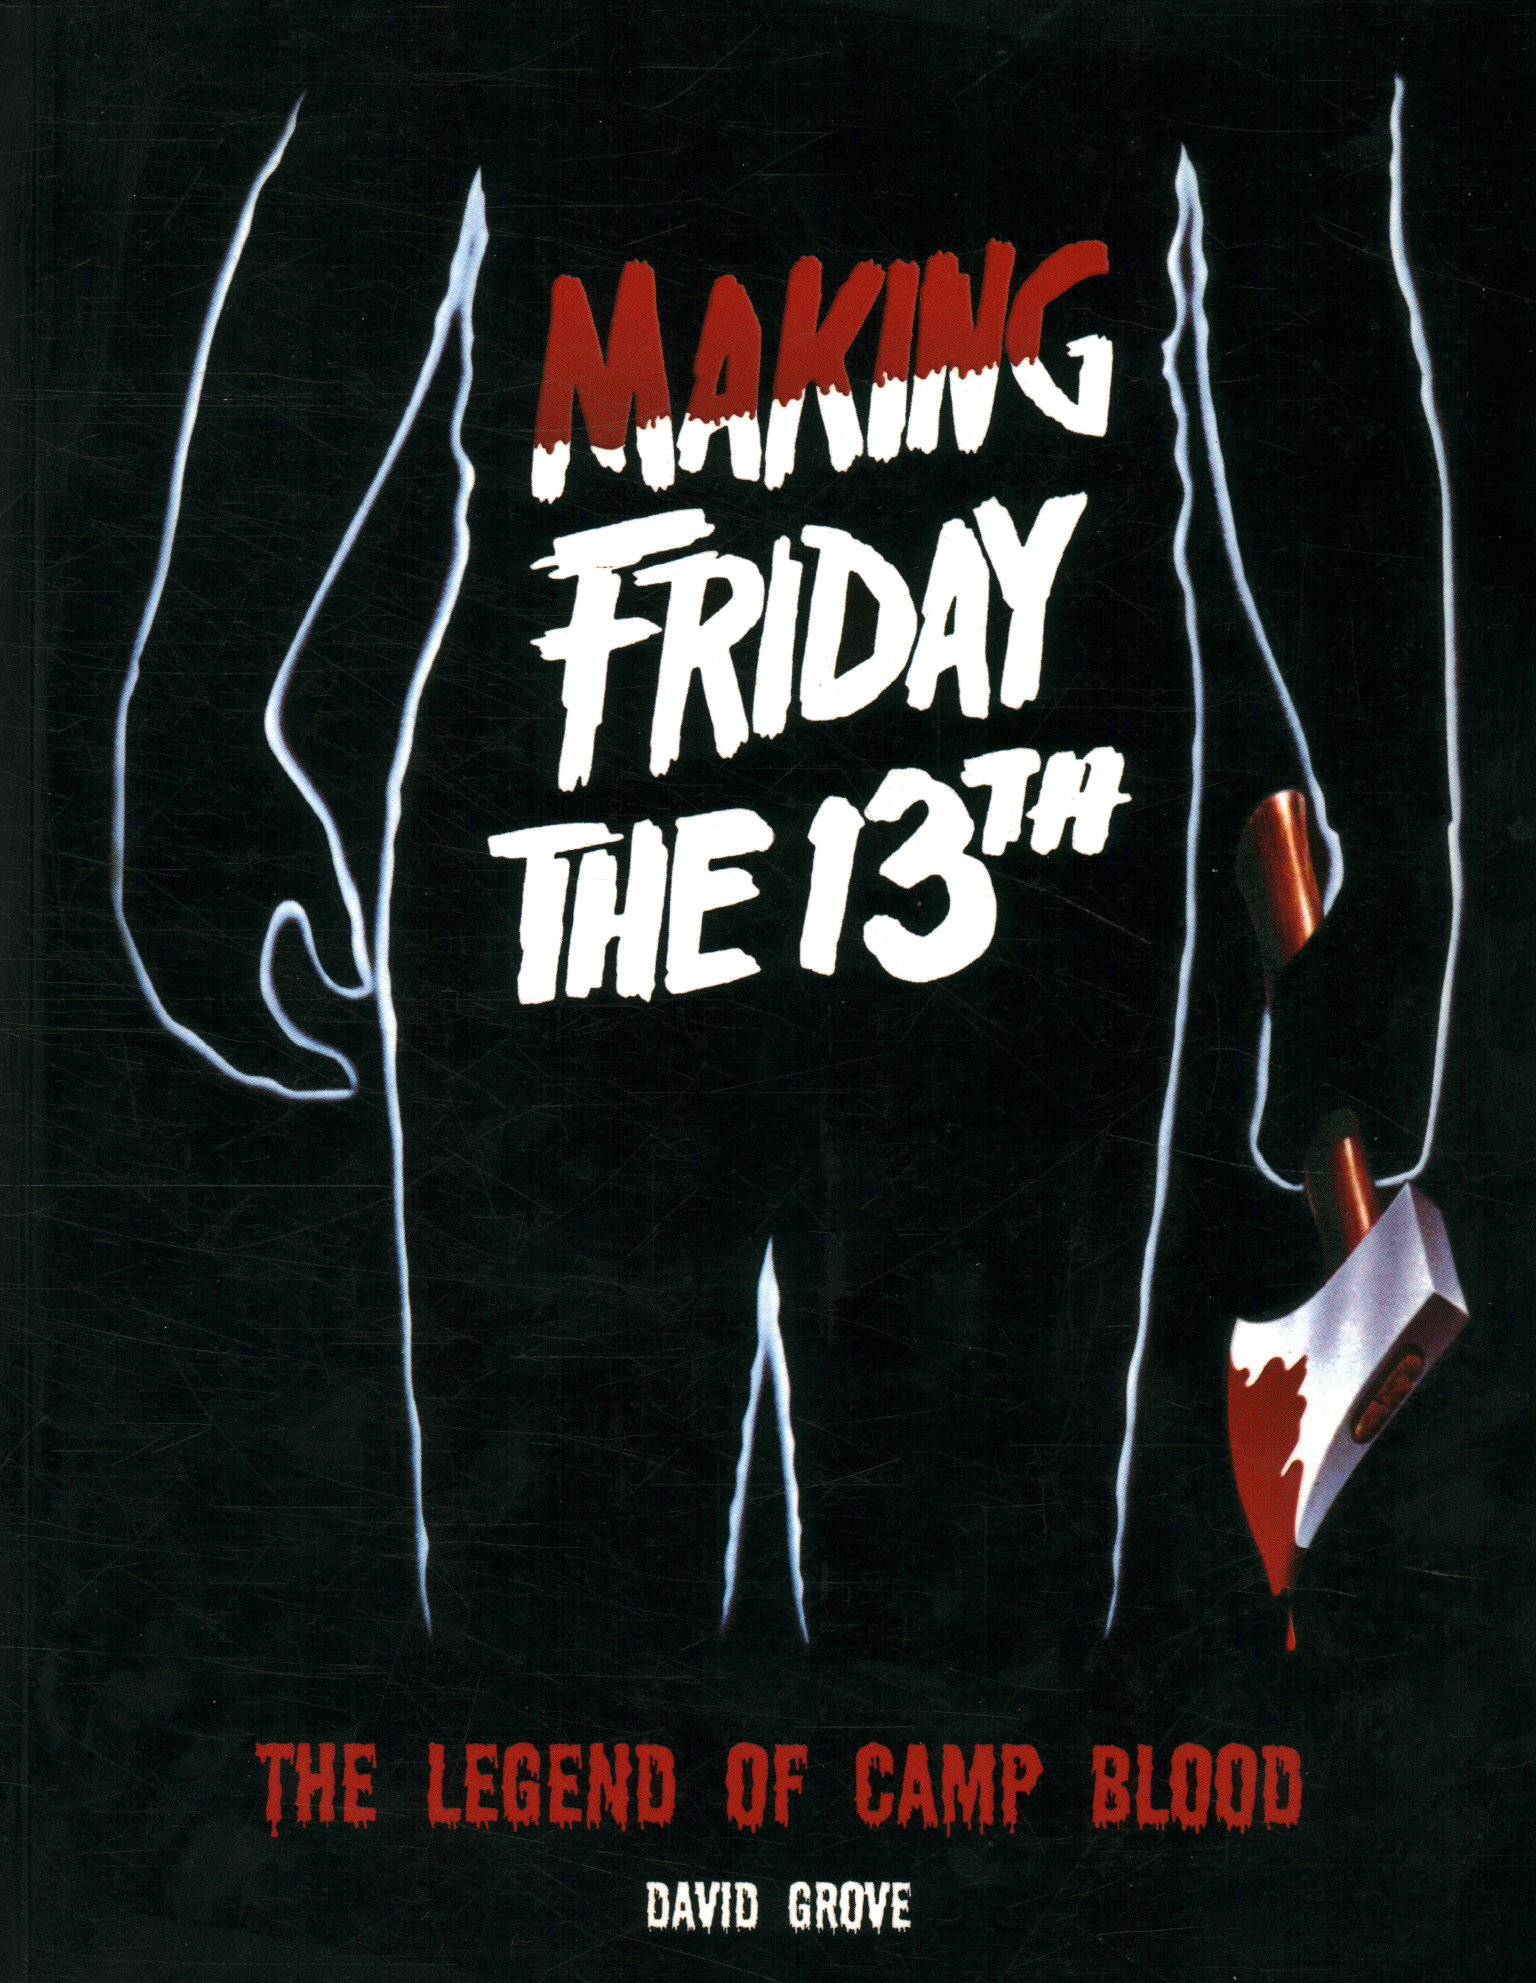 Making Friday the 13th. The Legend of%,Making Friday the 13th. The Legend of%